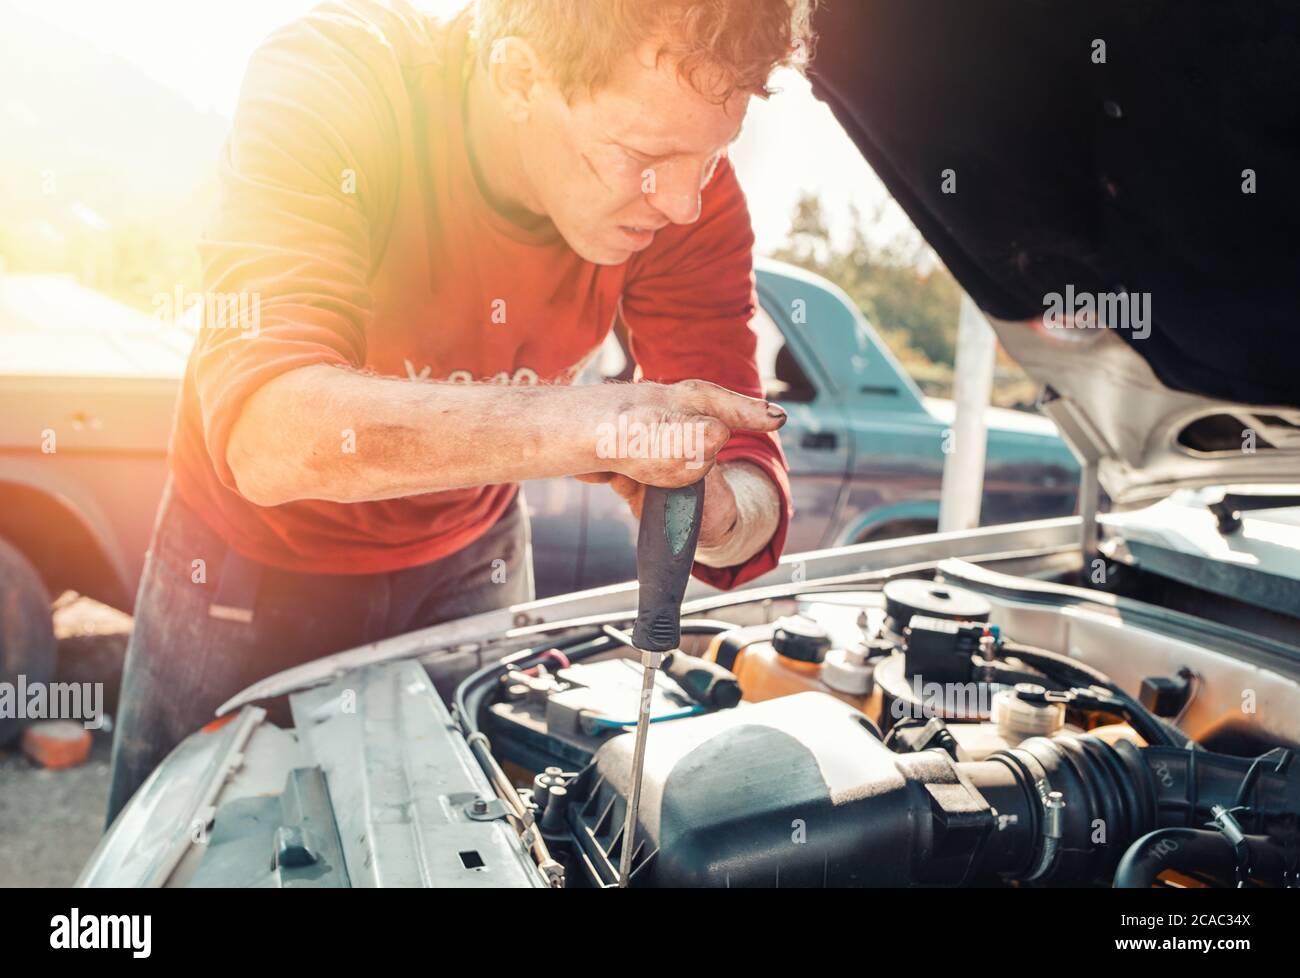 The concept of disability of people and their adaptation to life. A blond disabled man repairs a car, works with a screwdriver. There are no fingers o Stock Photo